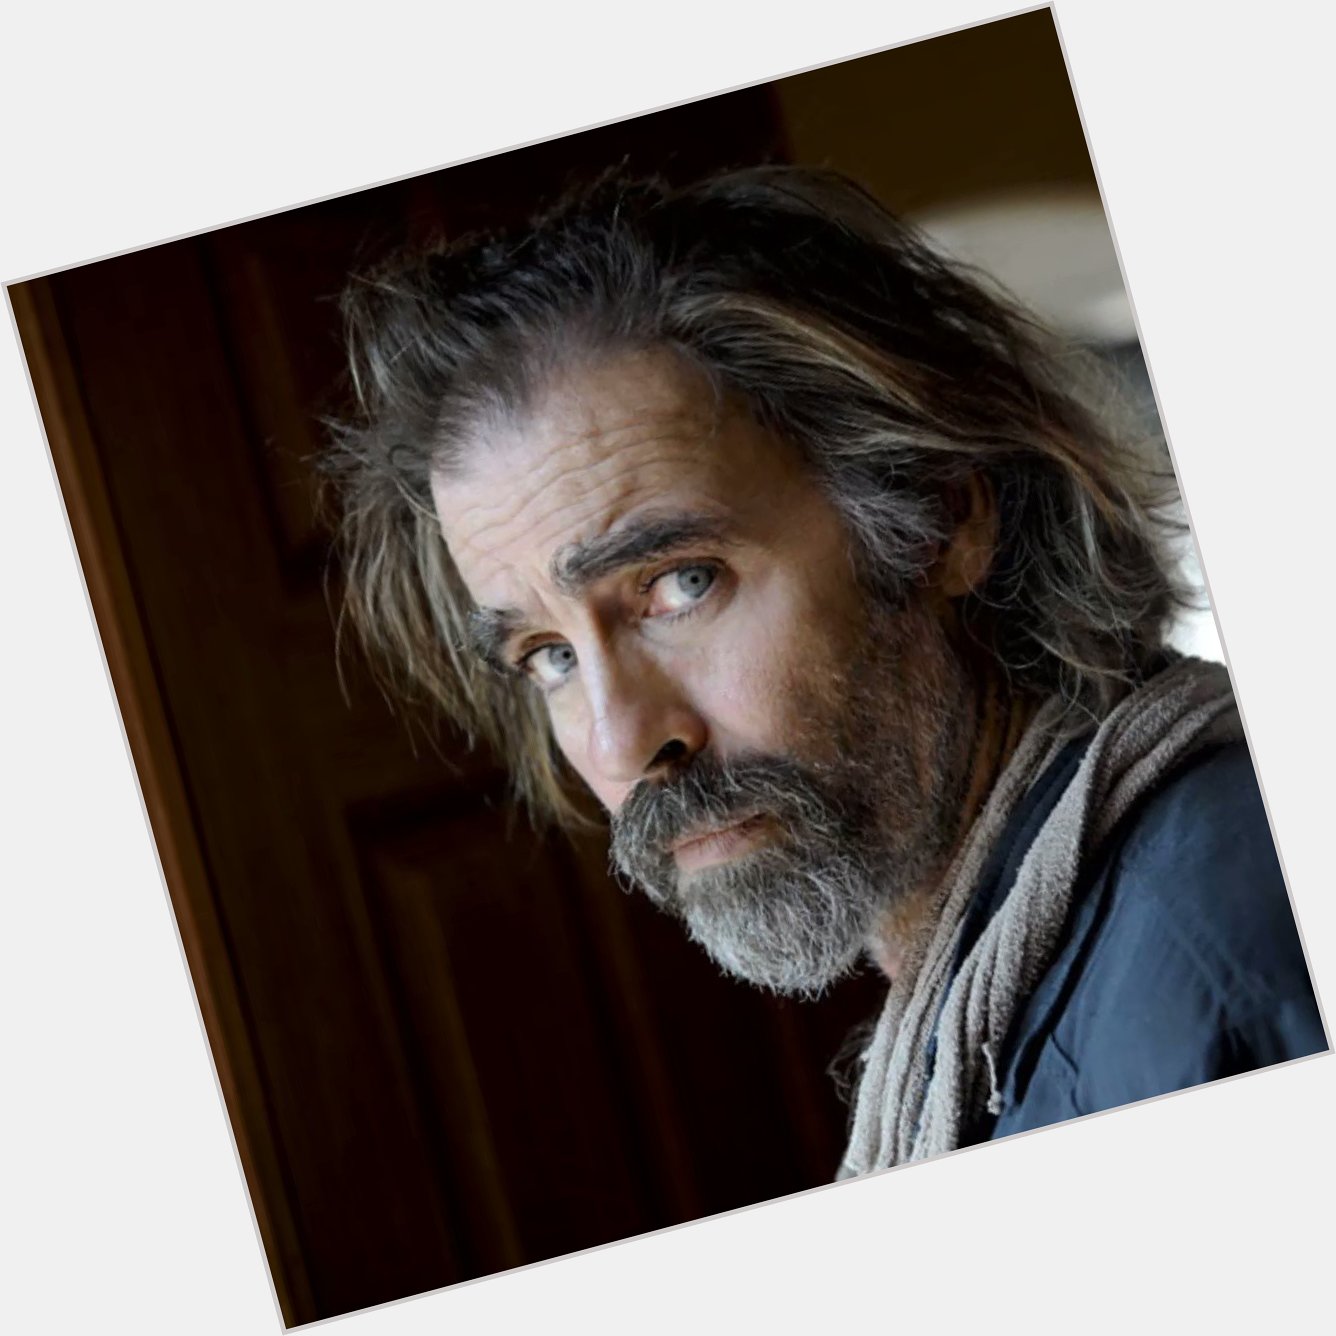 I\ve always liked this guy in everything I see him in. Happy birthday Jeff Fahey!  